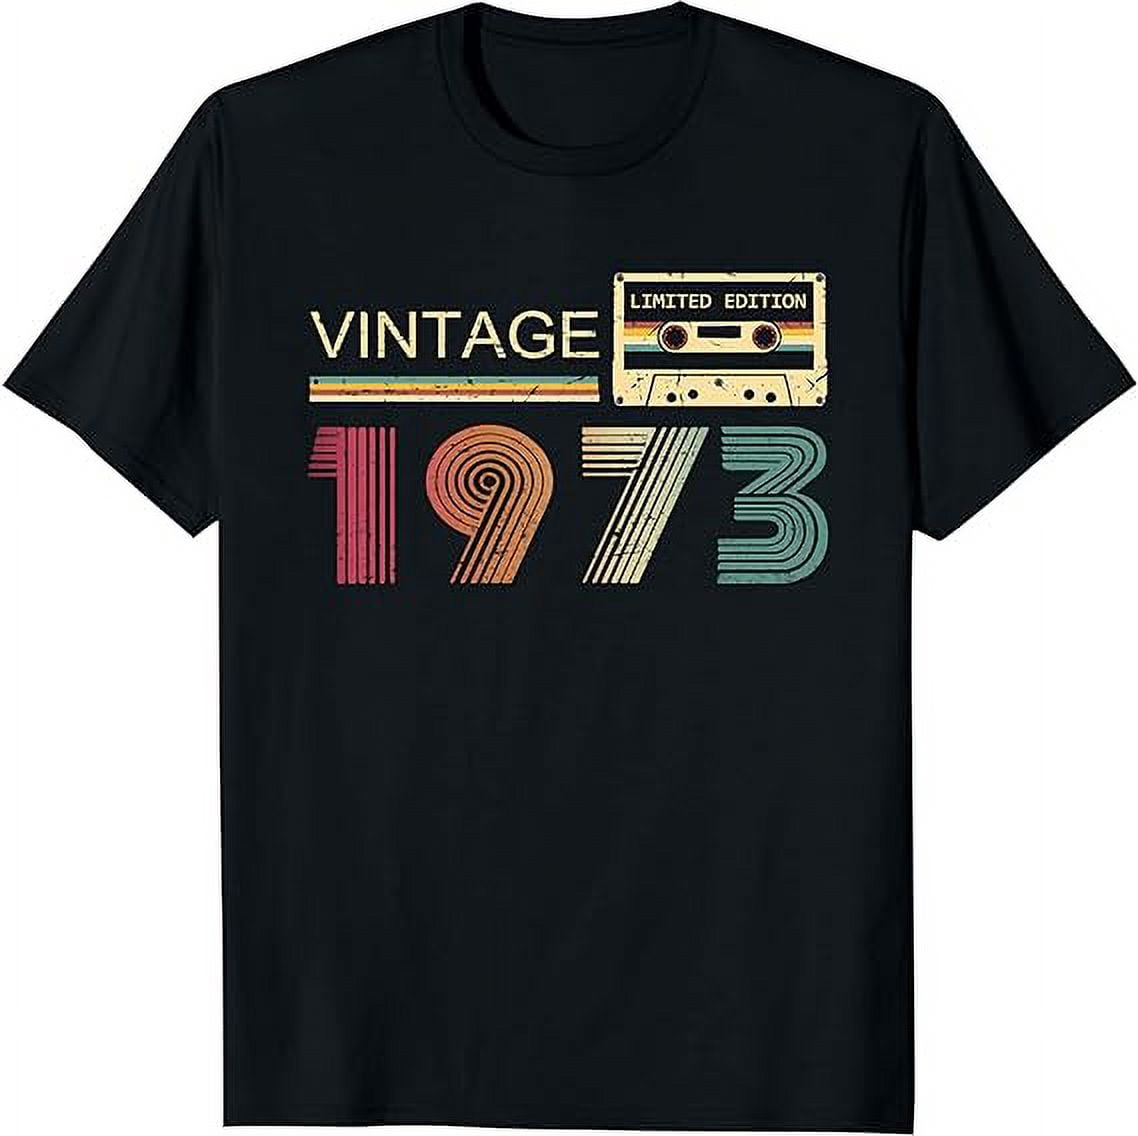 Vintage 1973 T Shirts for Men 50th Birthday Gifts for Men Husband ...